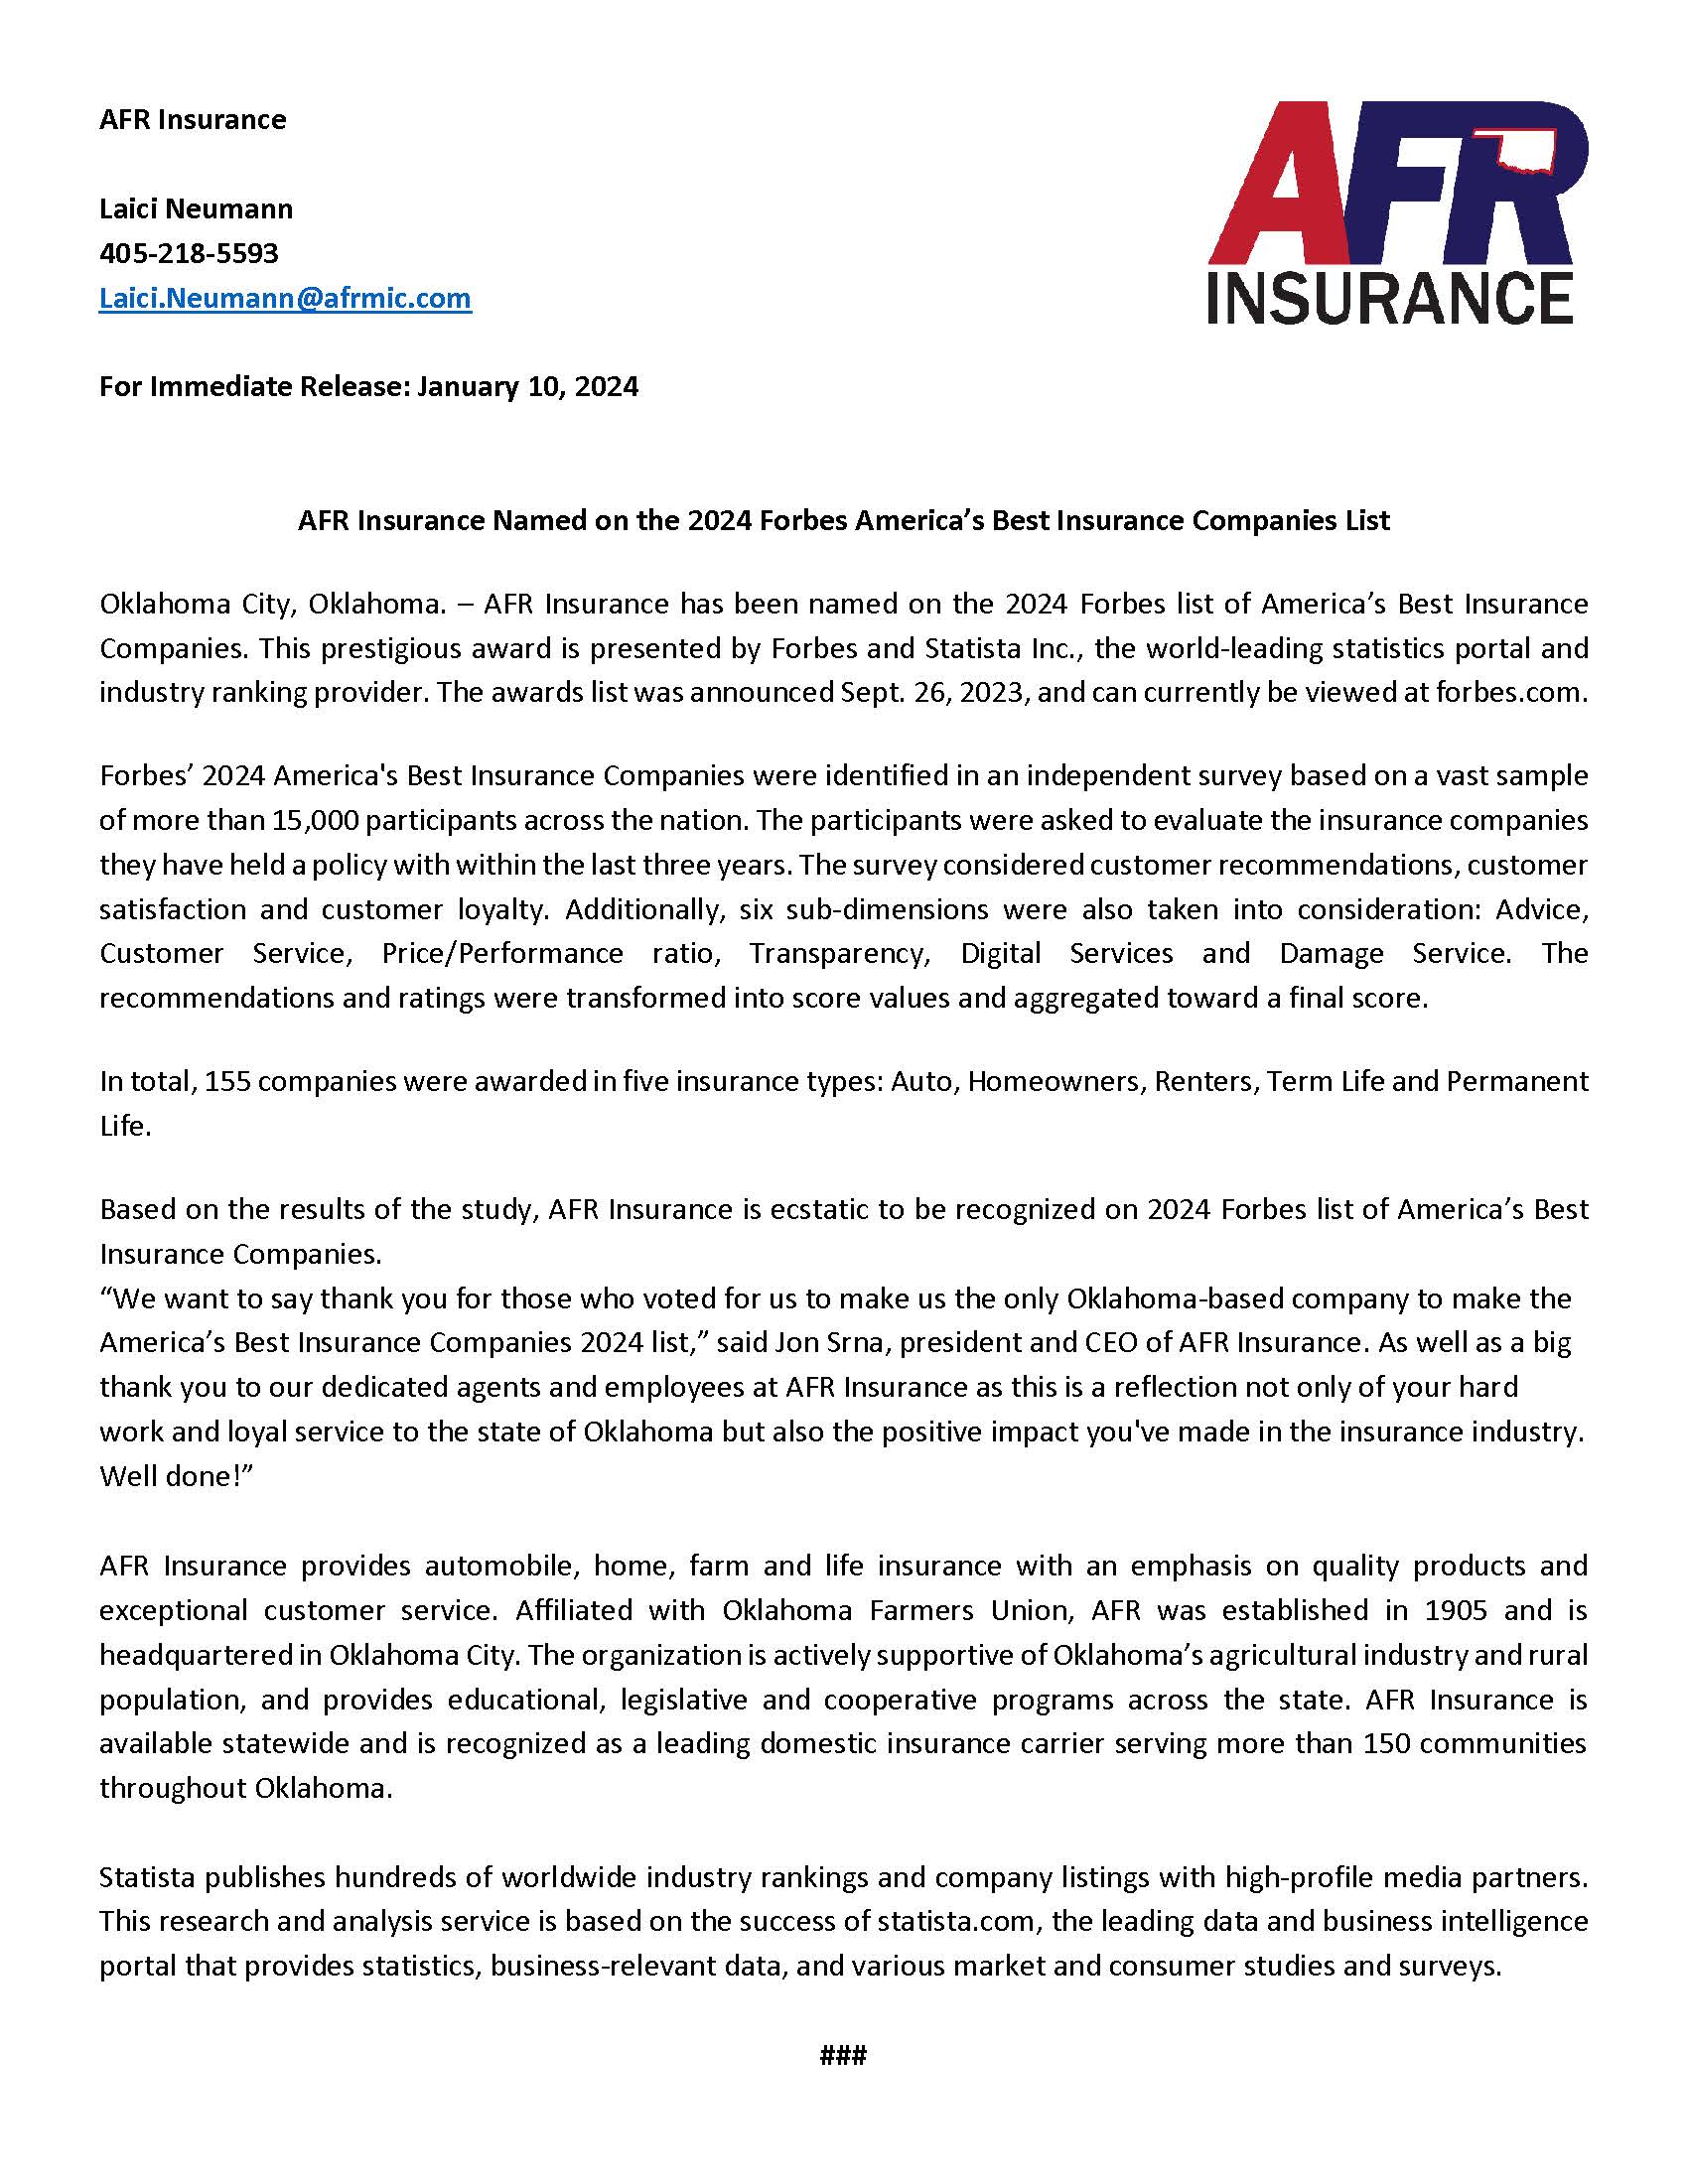 AFR Insurance Press Release for Forbes Americas Best Insurance Companies 2024 Final